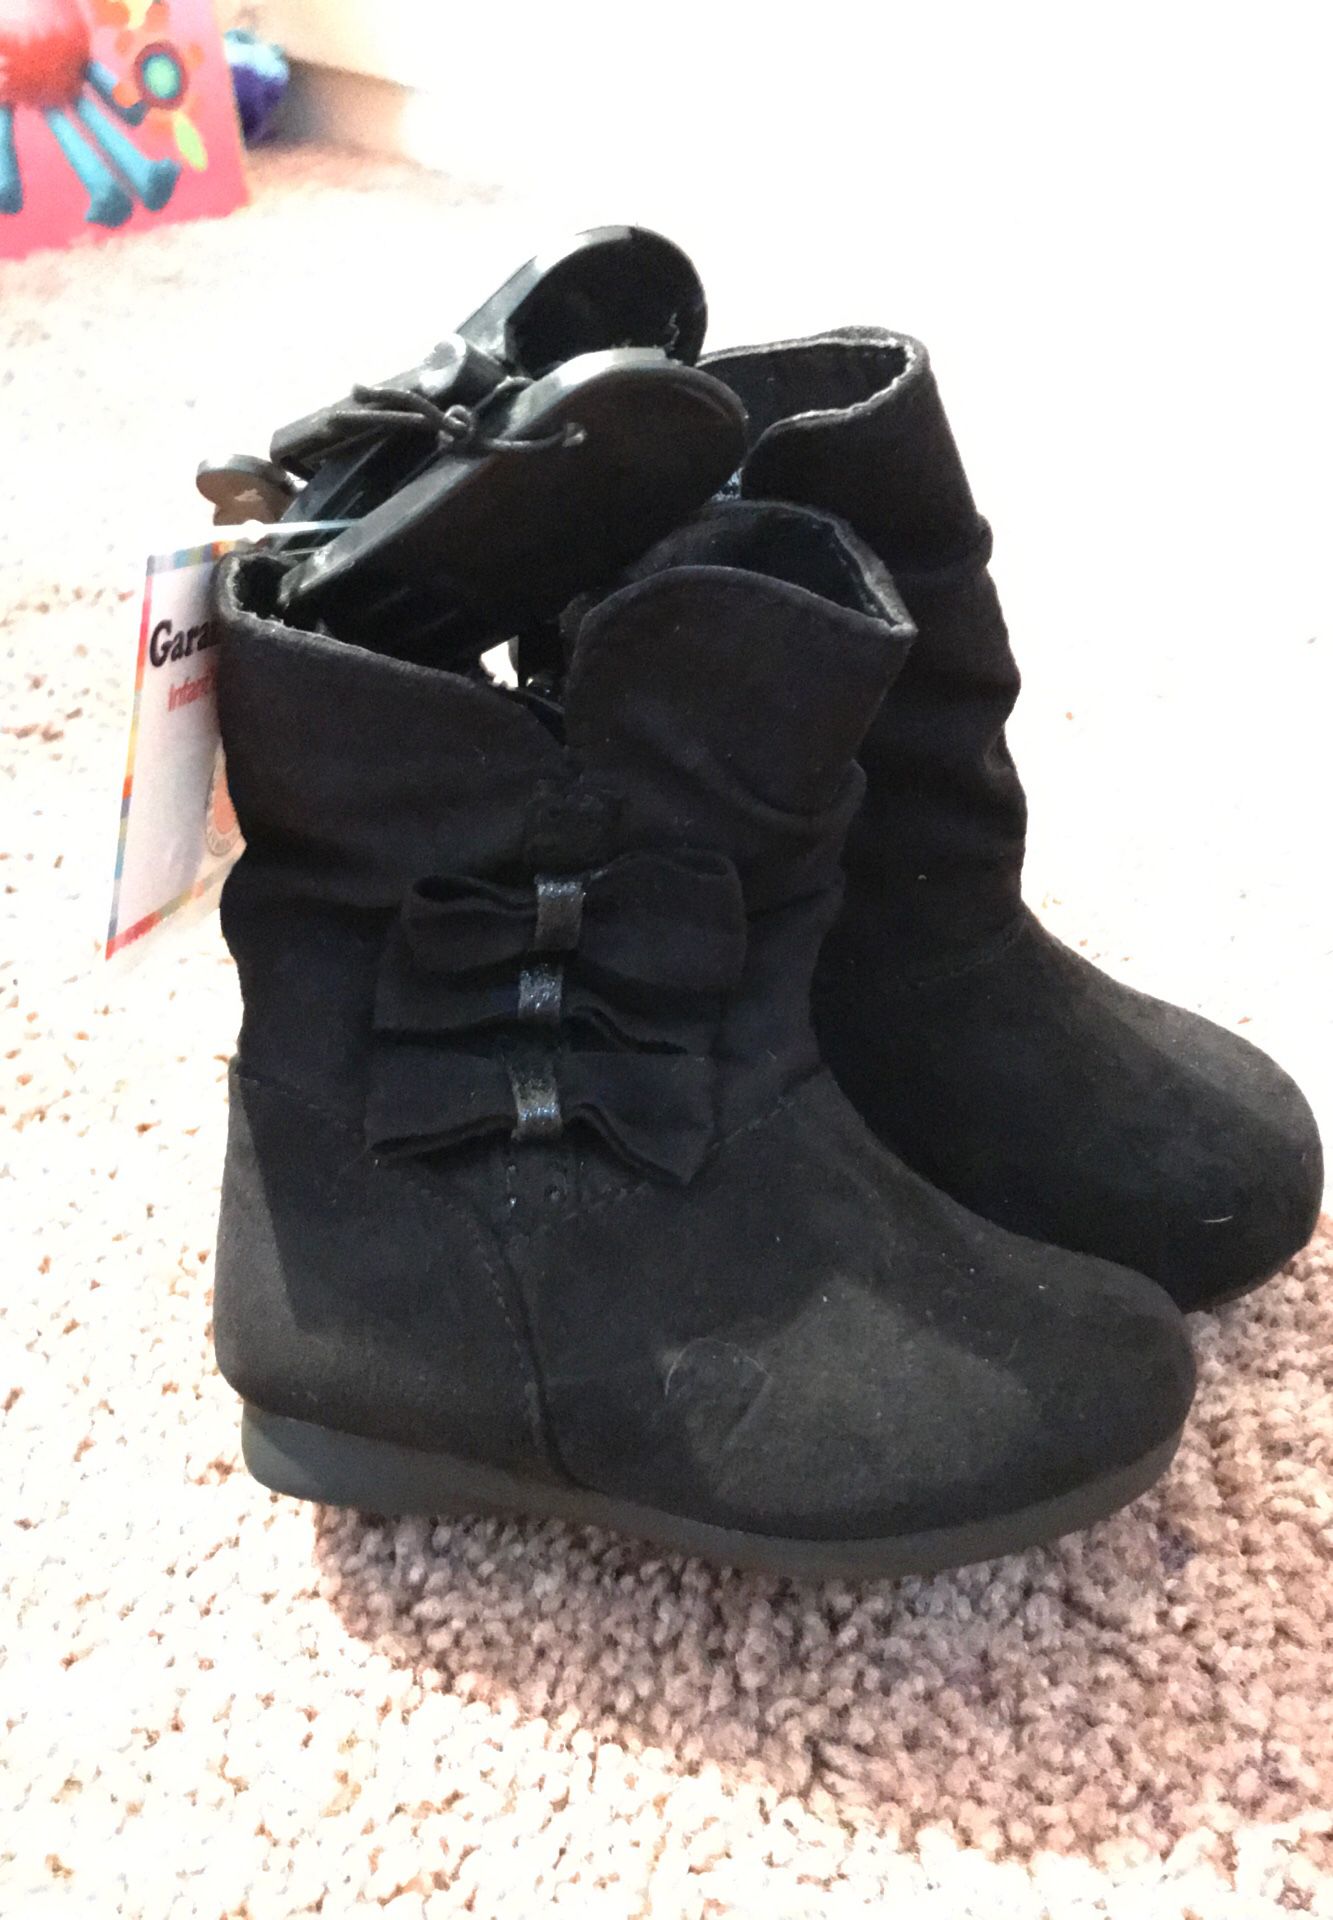 Brand new toddler boots size 4